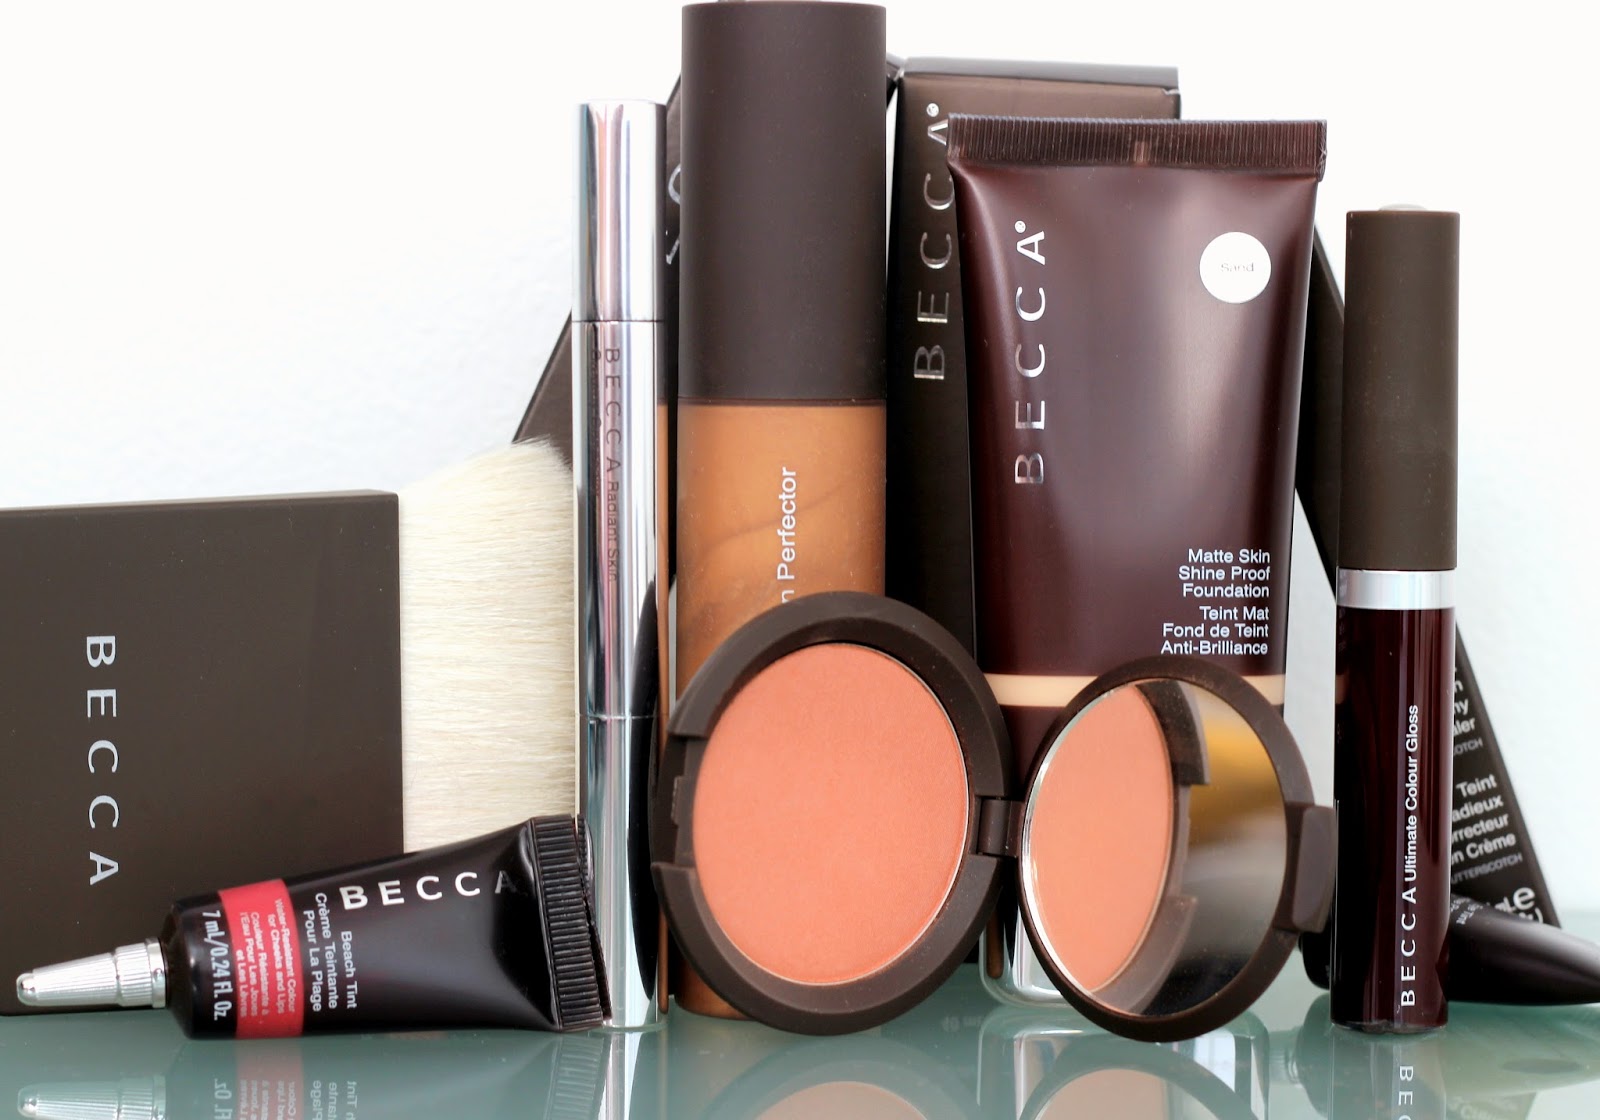 BECCA products